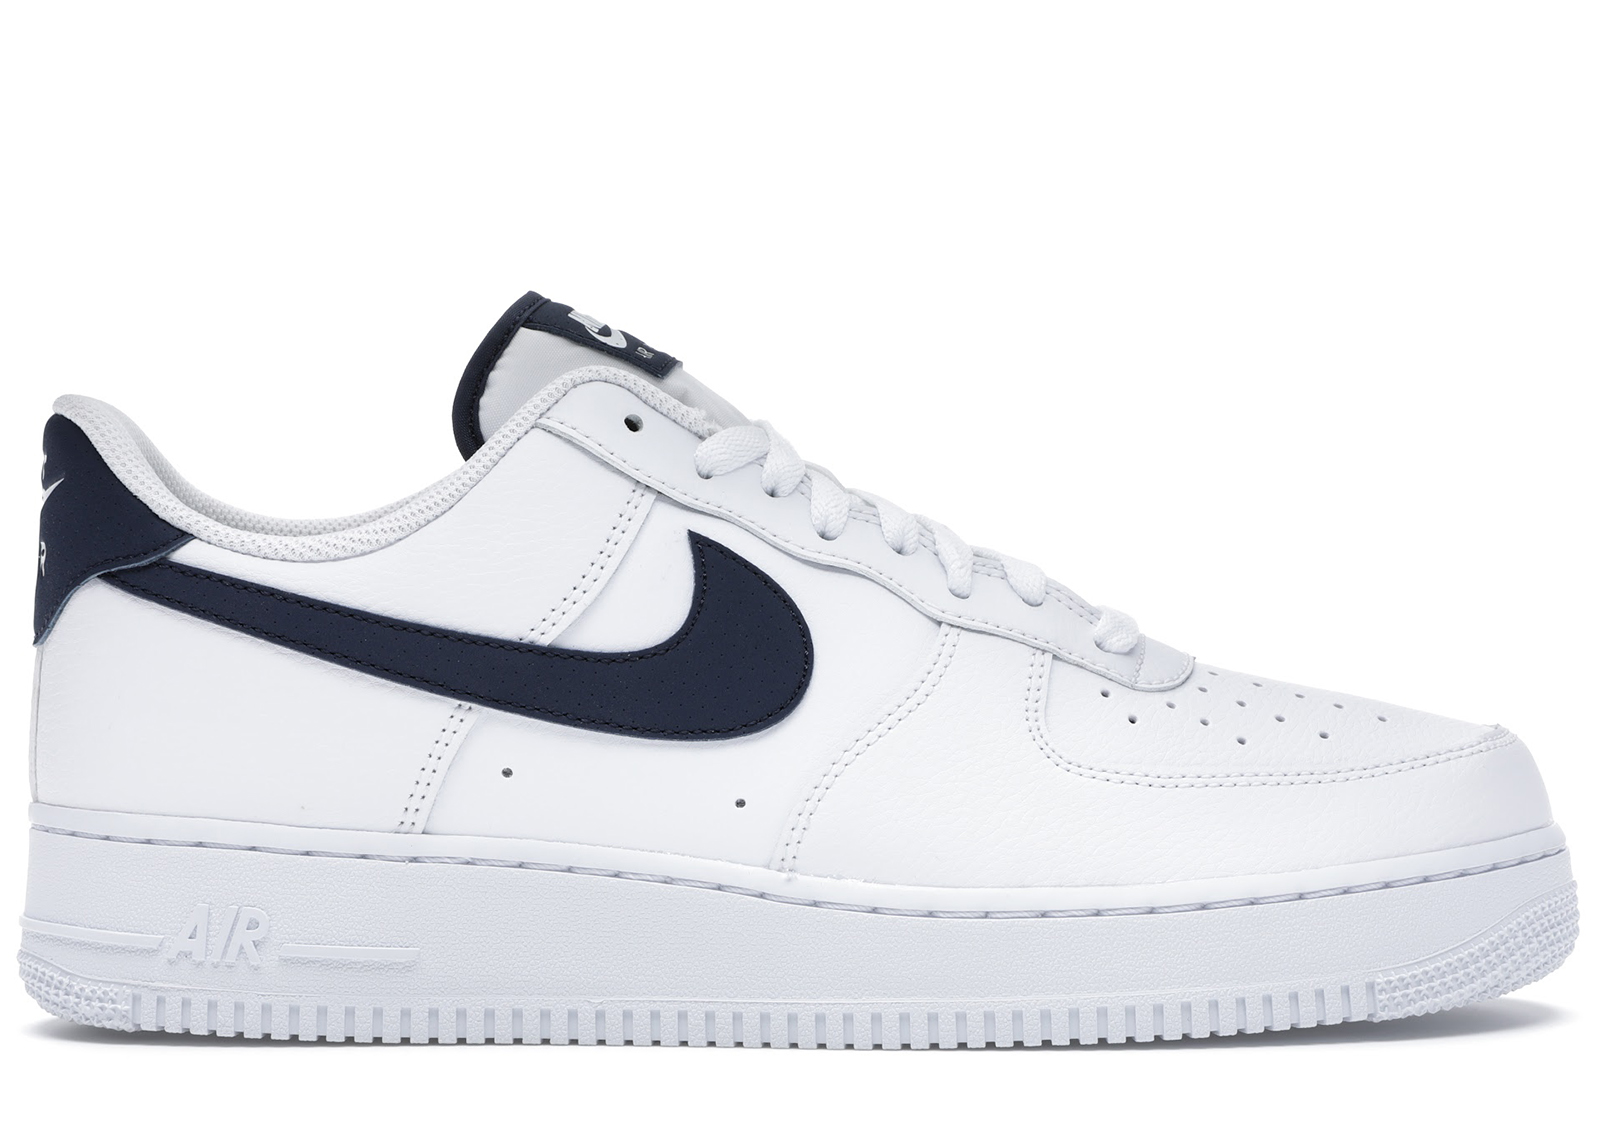 navy blue patent leather air force ones